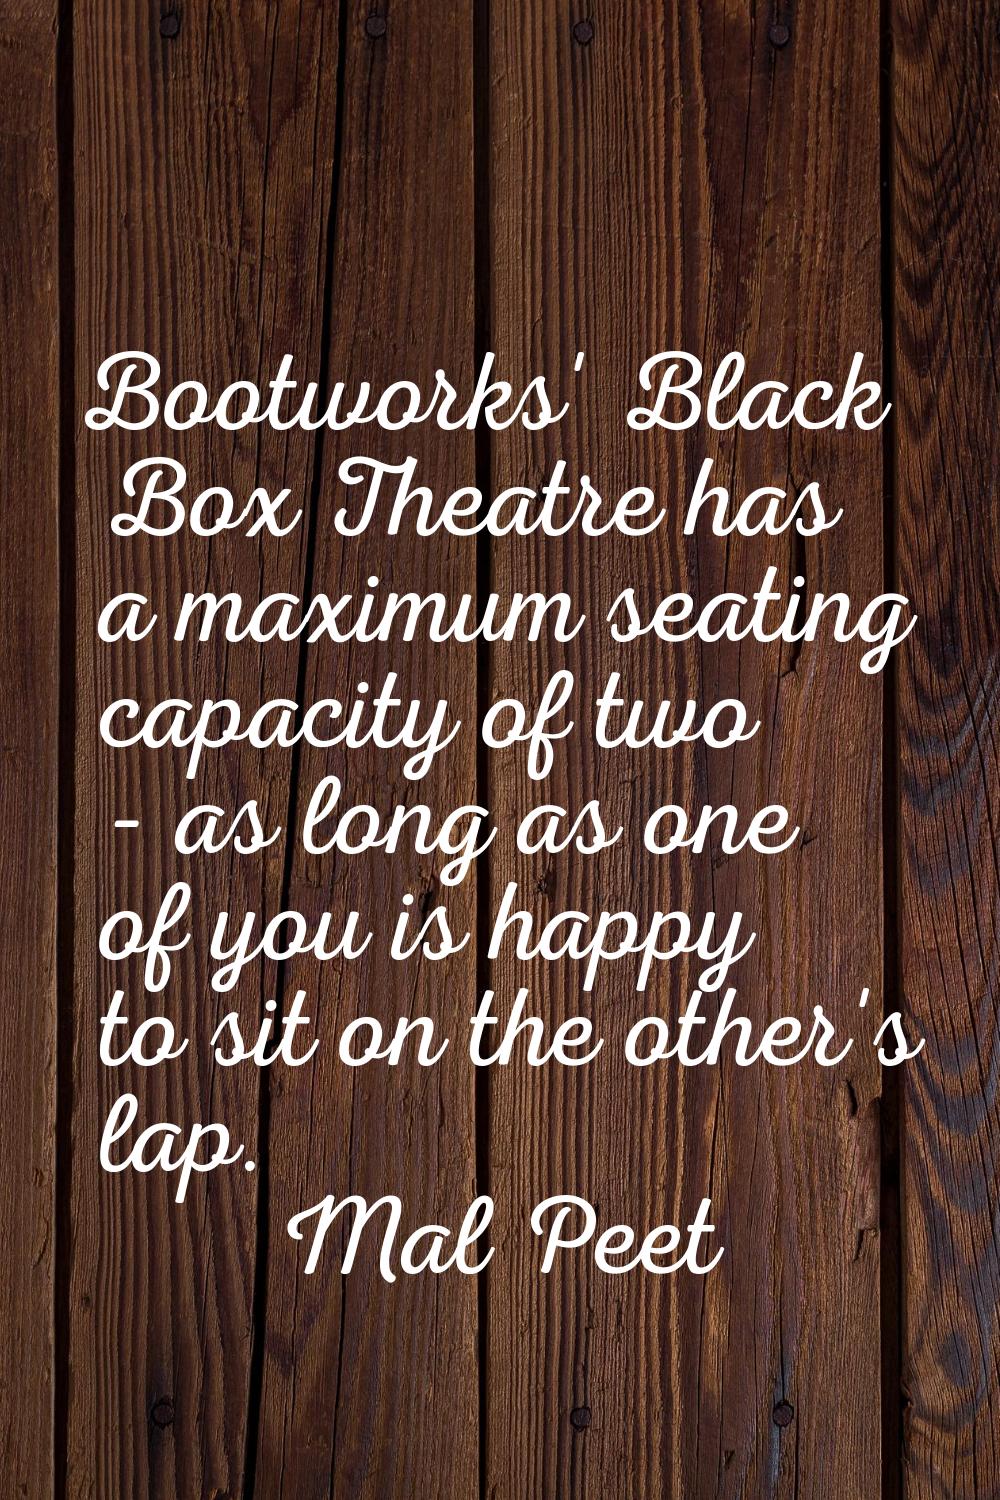 Bootworks' Black Box Theatre has a maximum seating capacity of two - as long as one of you is happy